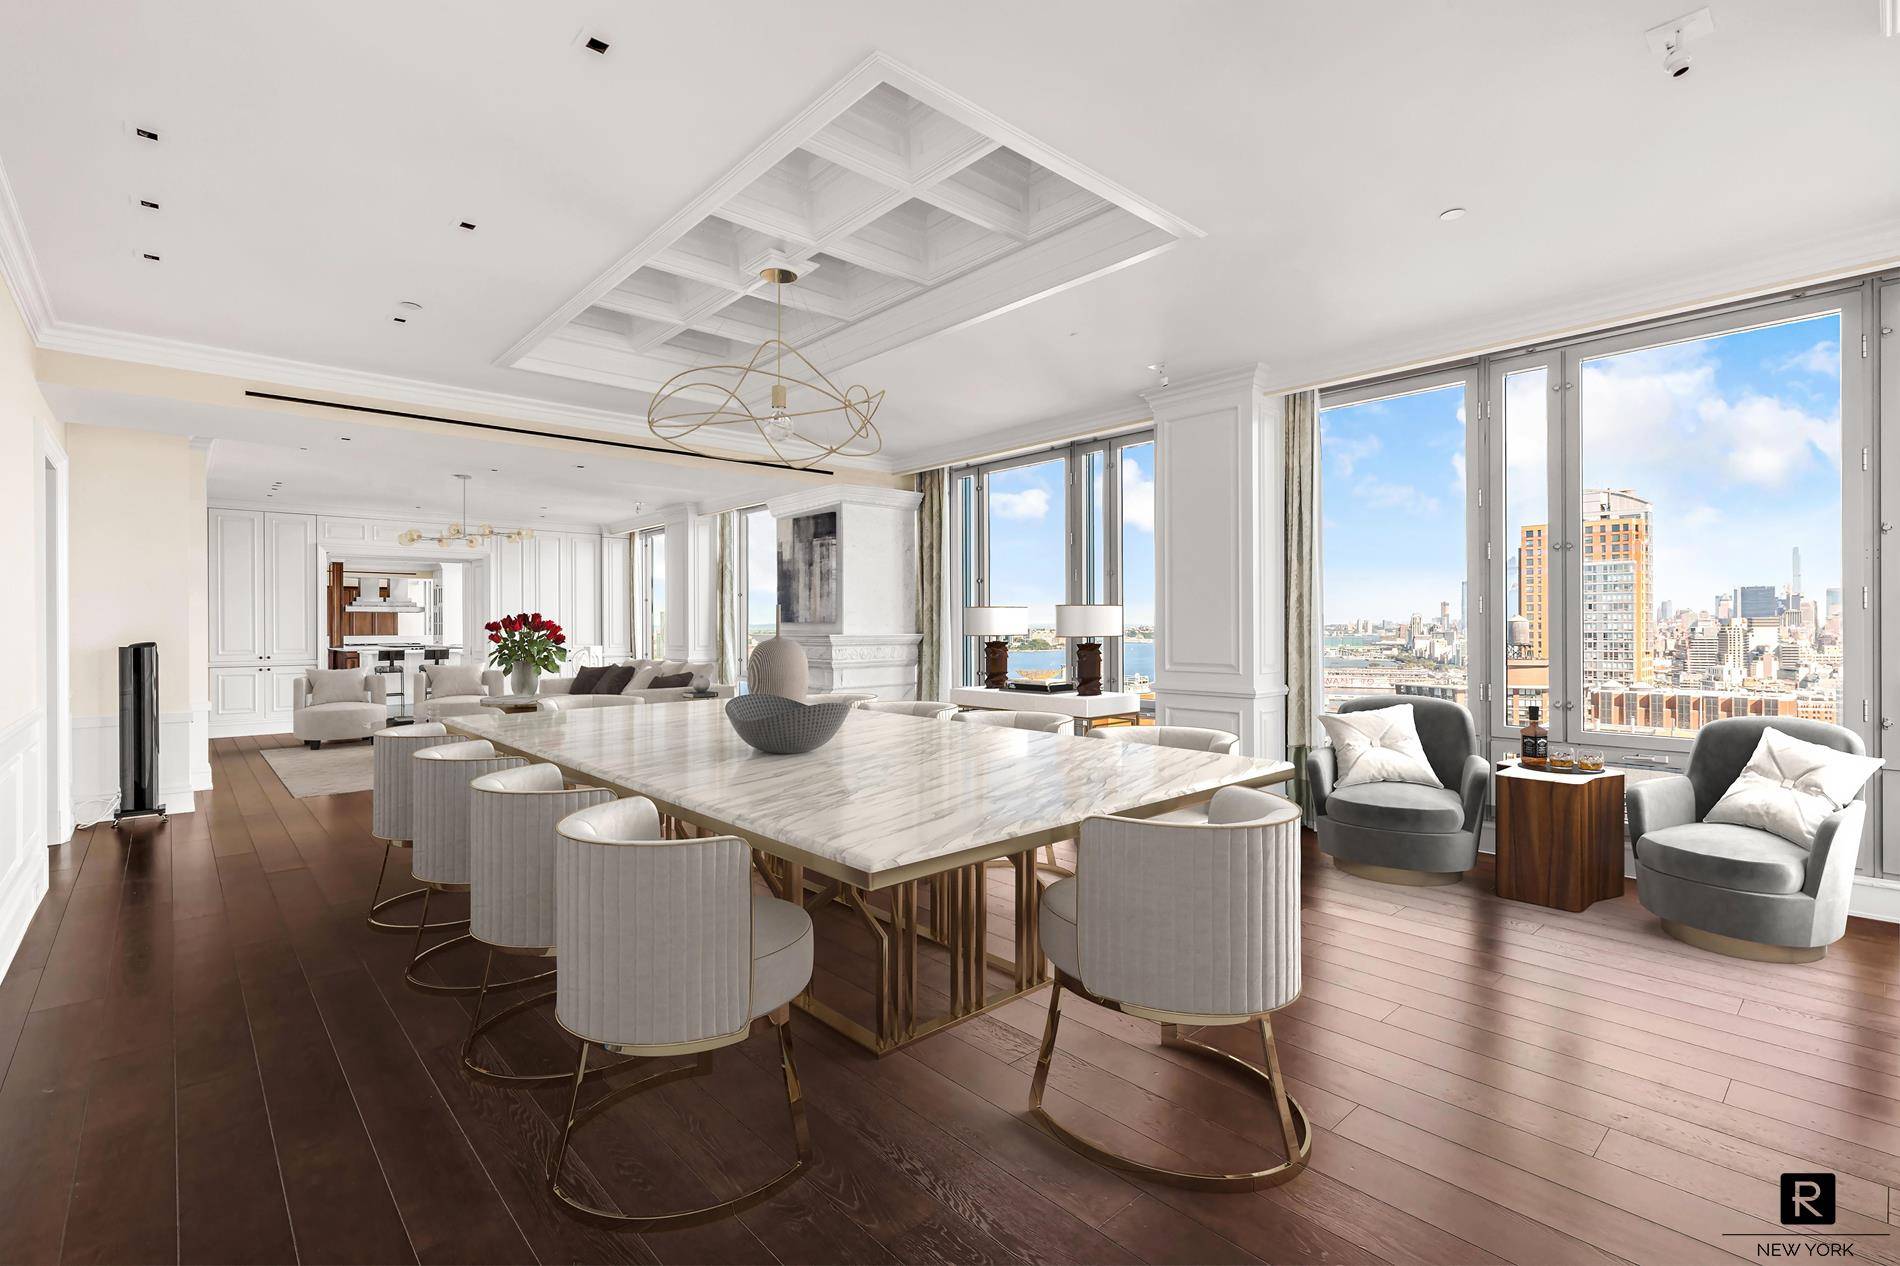 Penthouse 3, the crown atop the Riverhouse Condominium, is an exceptional 4, 750sqft 4 bedroom, 5.